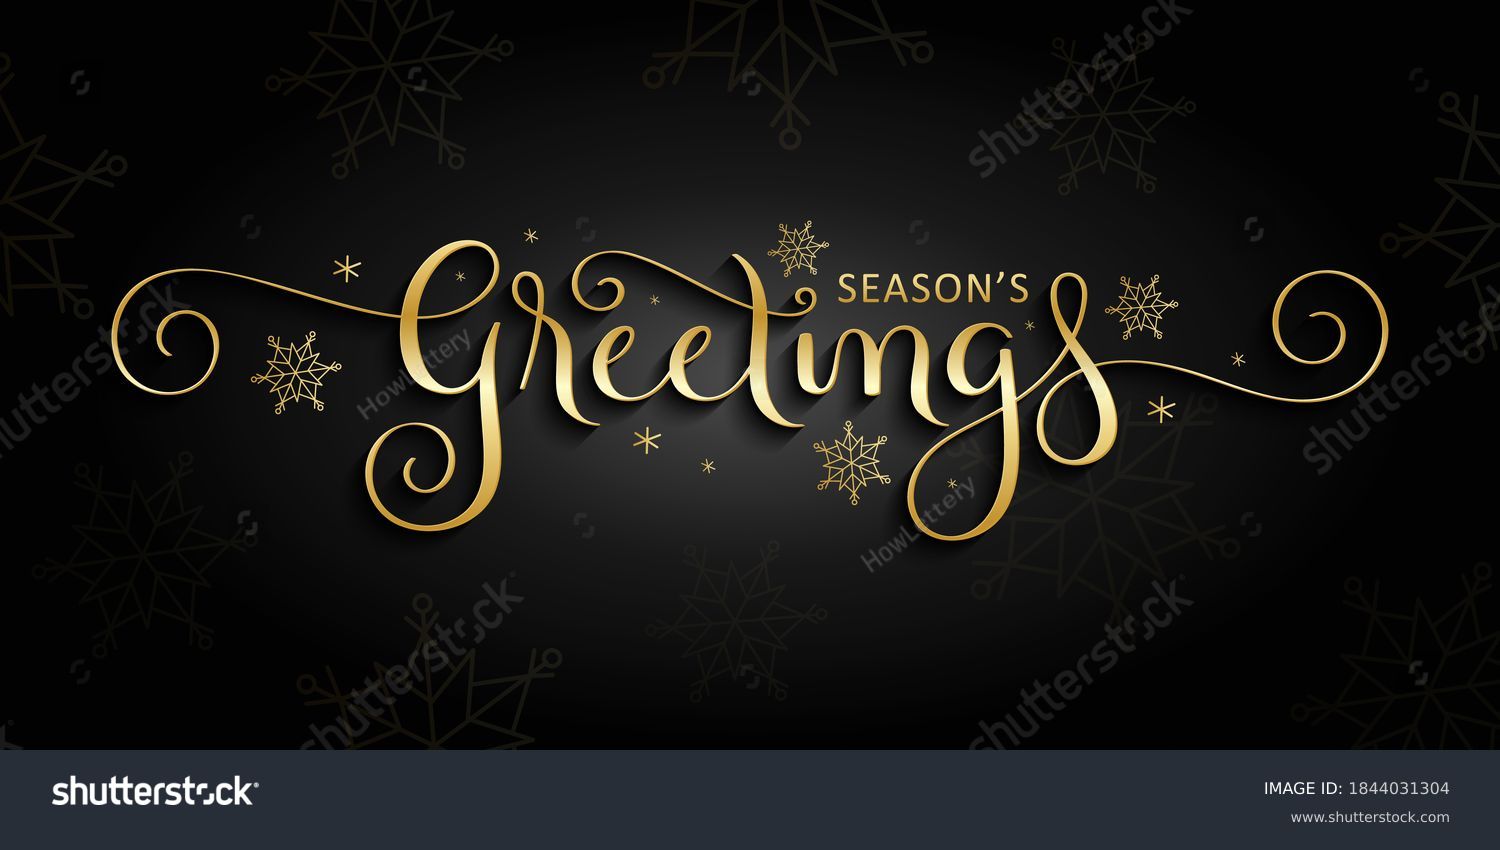 SEASON'S GREETINGS metallic vector gold brush calligraphy banner with spiral swashes on black background Stock Vector